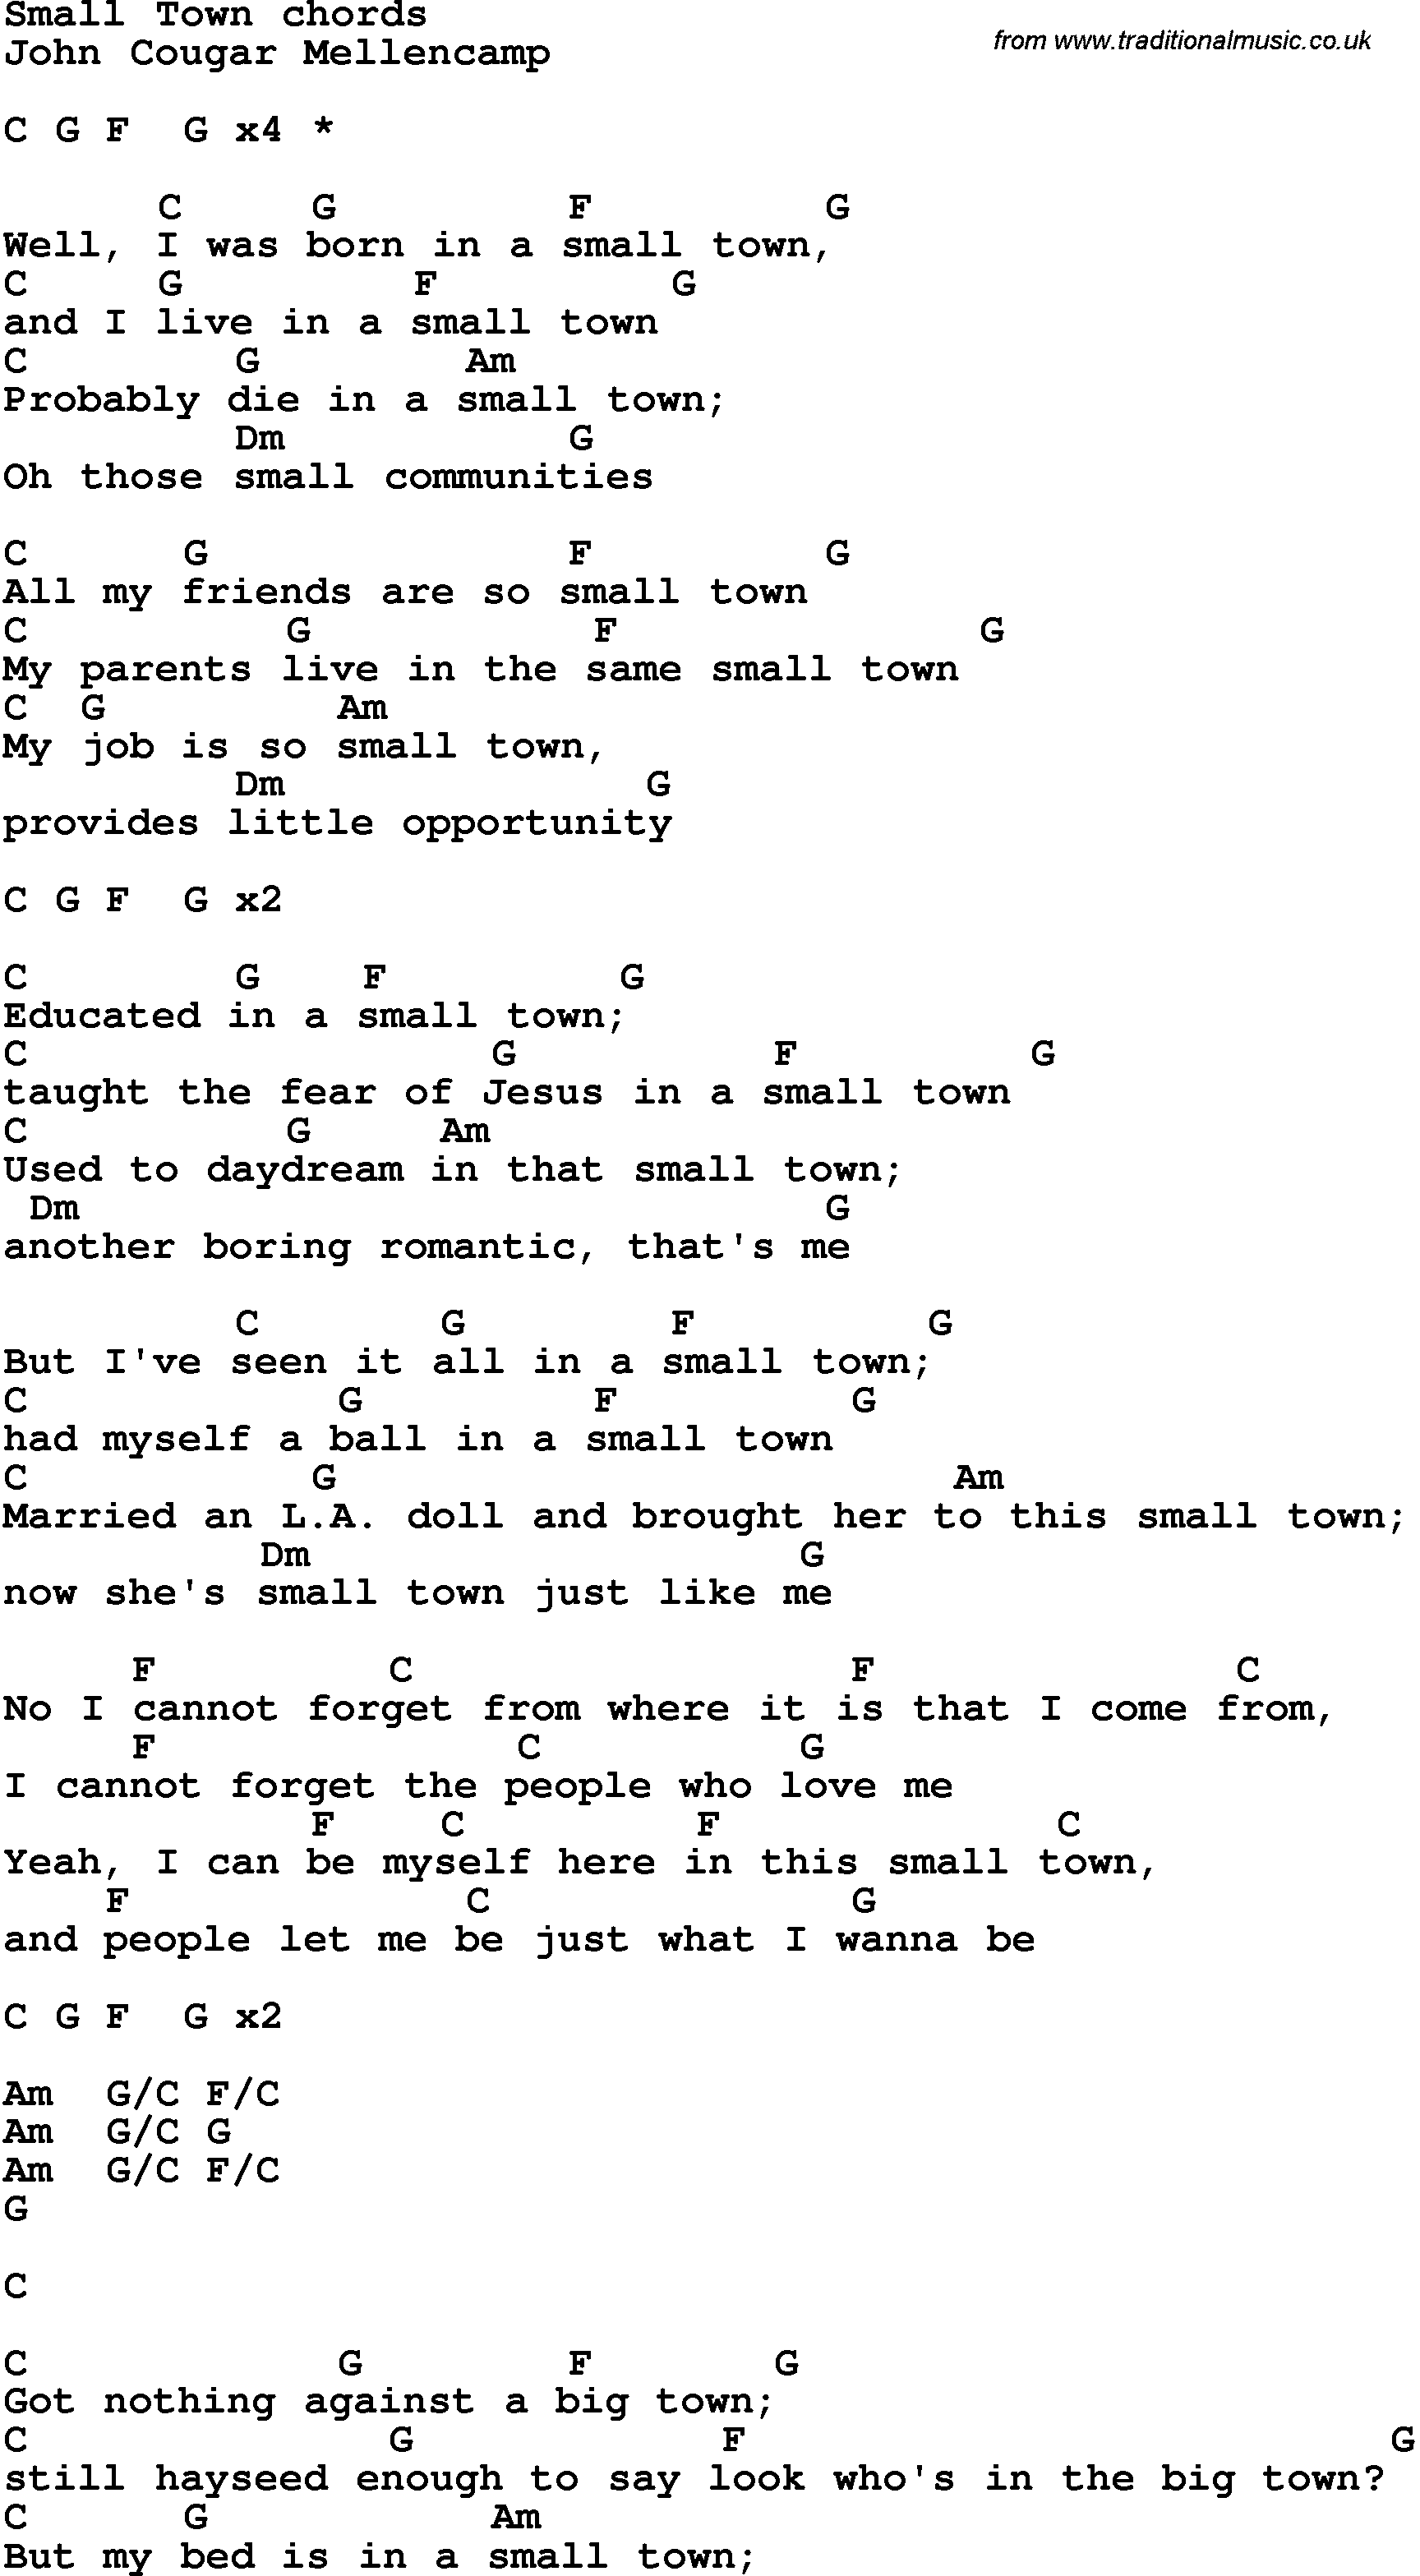 Song Lyrics with guitar chords for Small Town